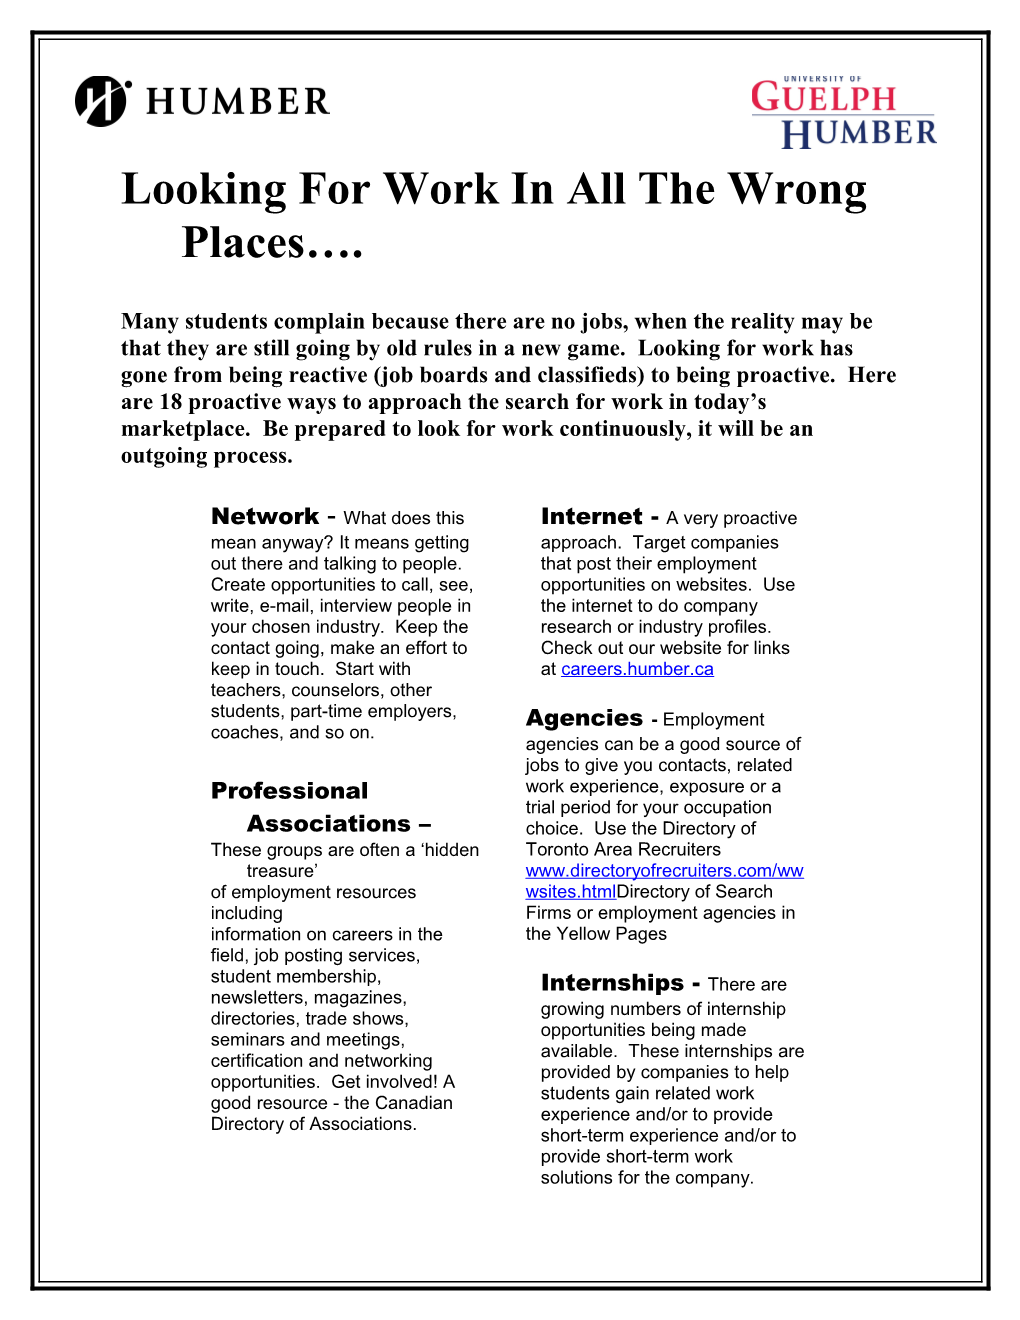 Looking for Work in All the Wrong Places